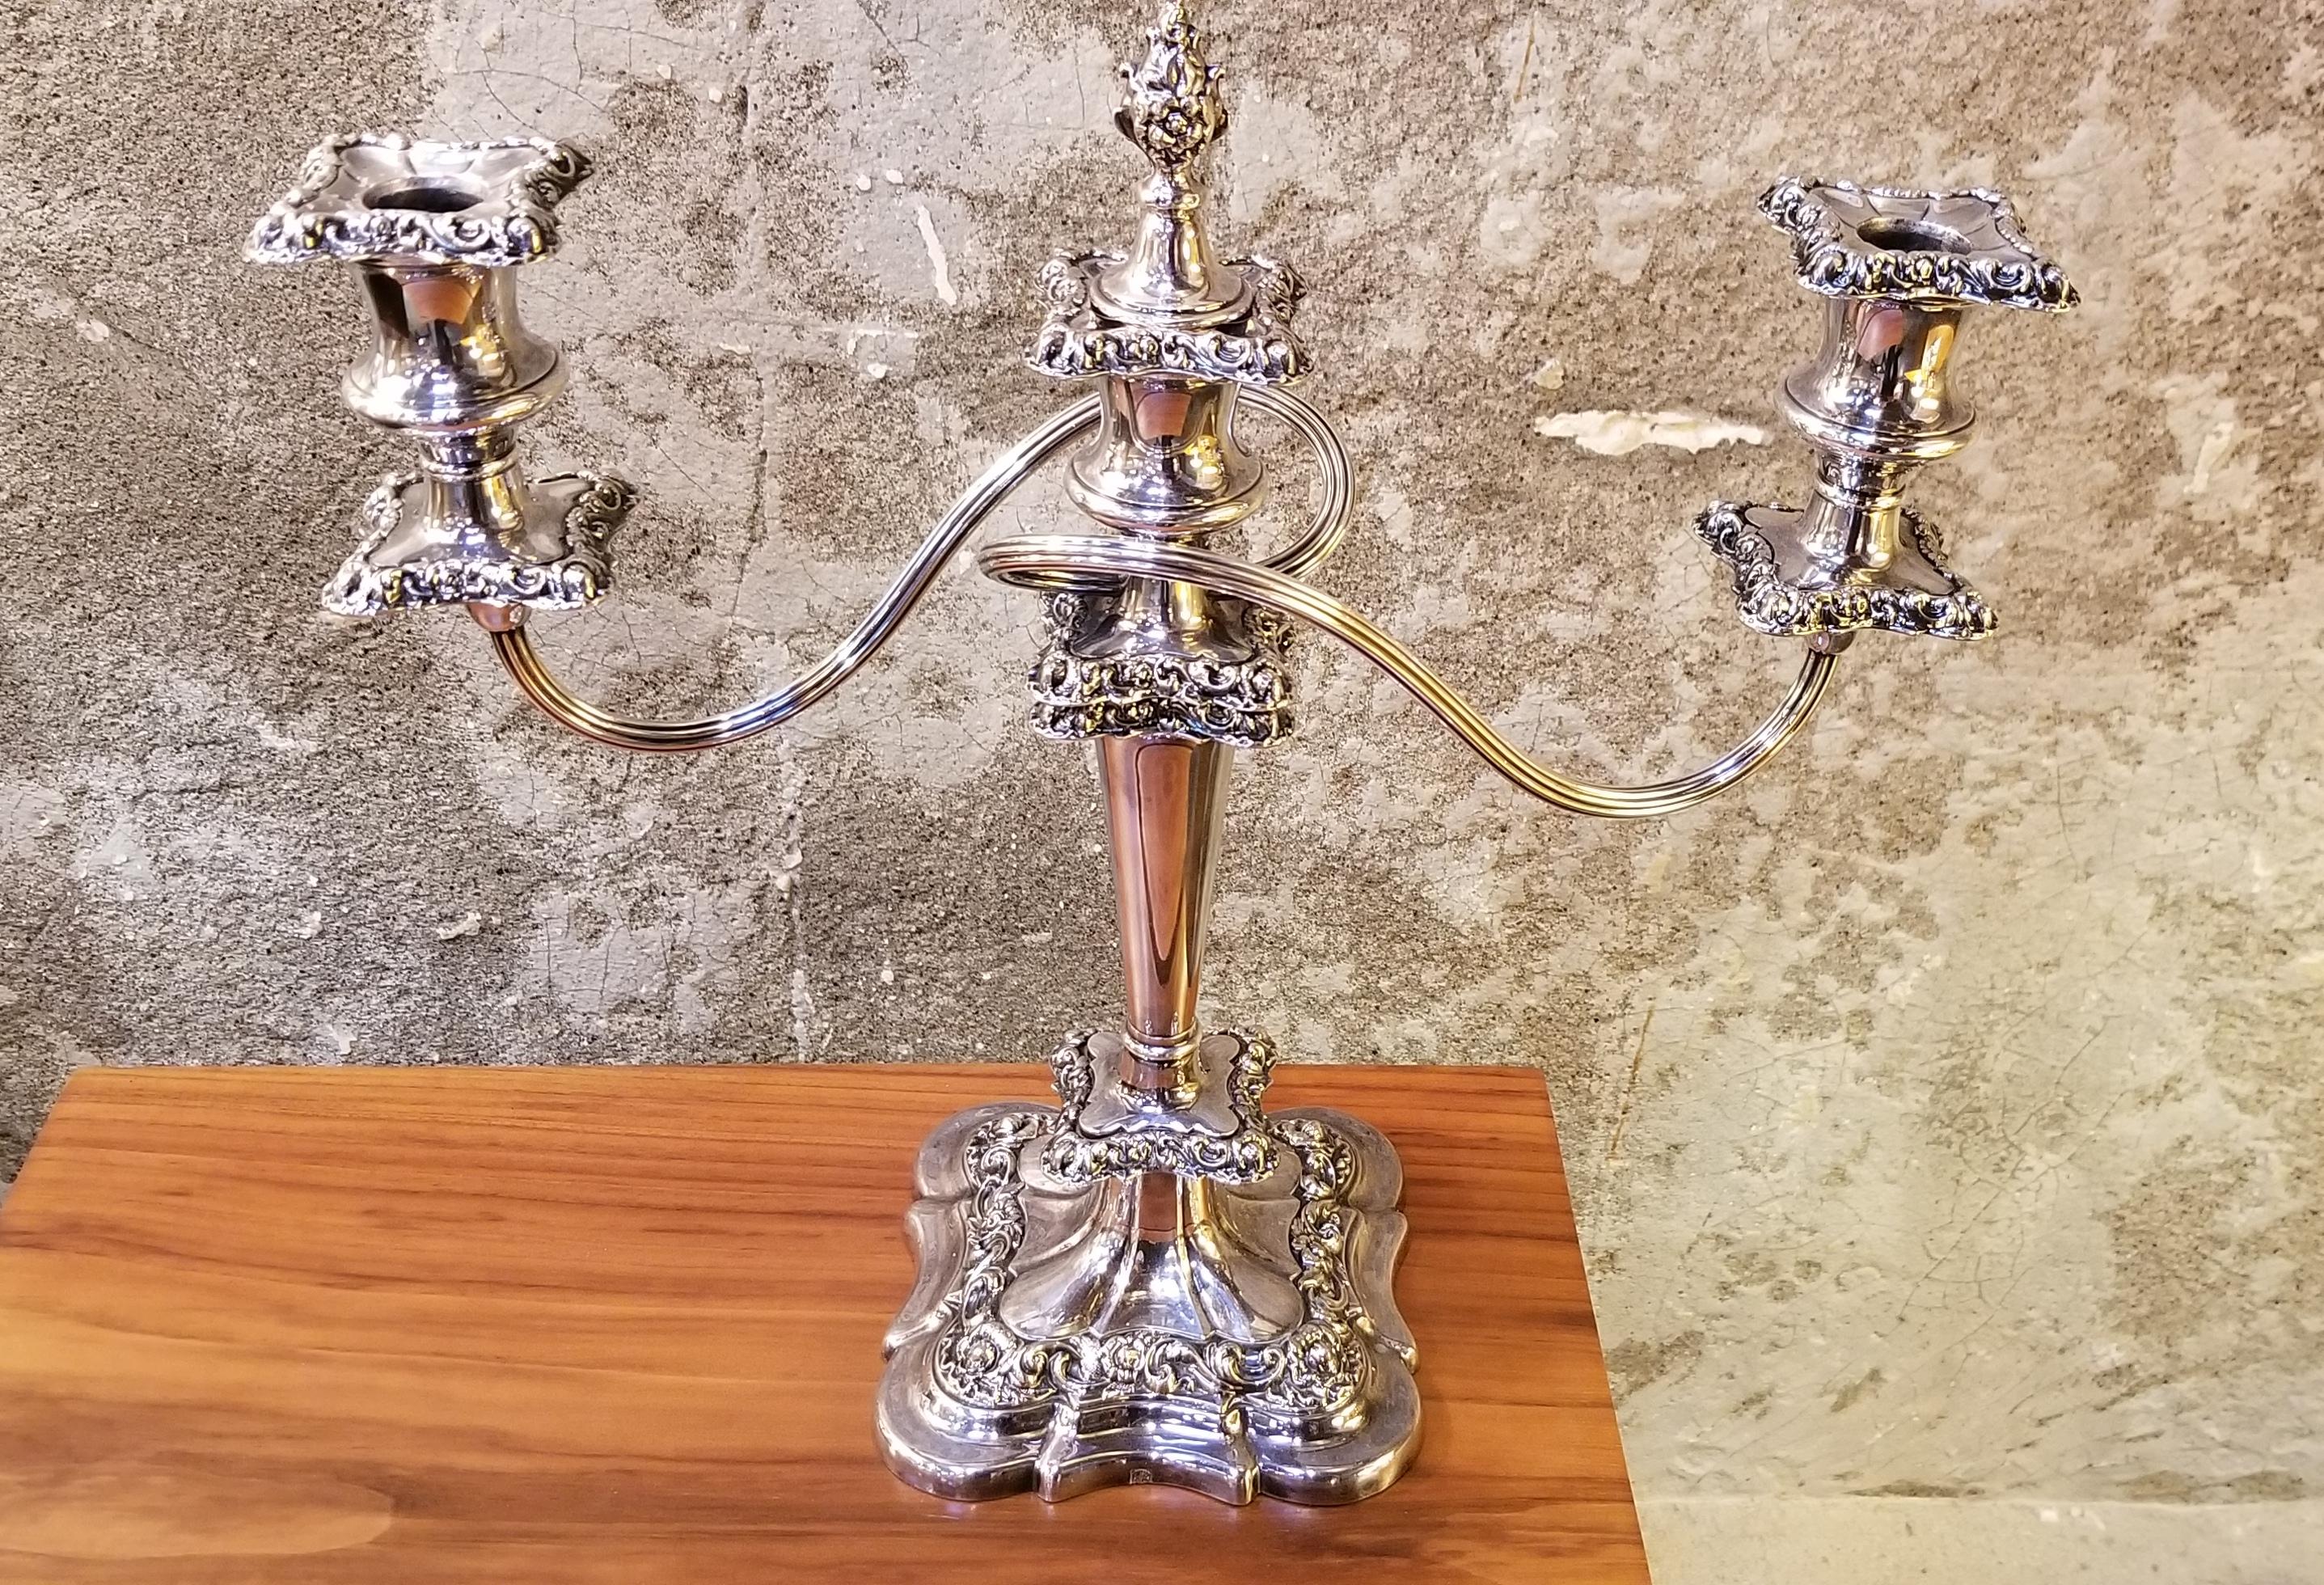 Ornate pair of early 20th century silver plate candlesticks by Barker-Ellis, Birmingham, England, circa. 1912. Detailed floral repousse, retaining original center finial, iron weighted bases, beautiful patina to silver.